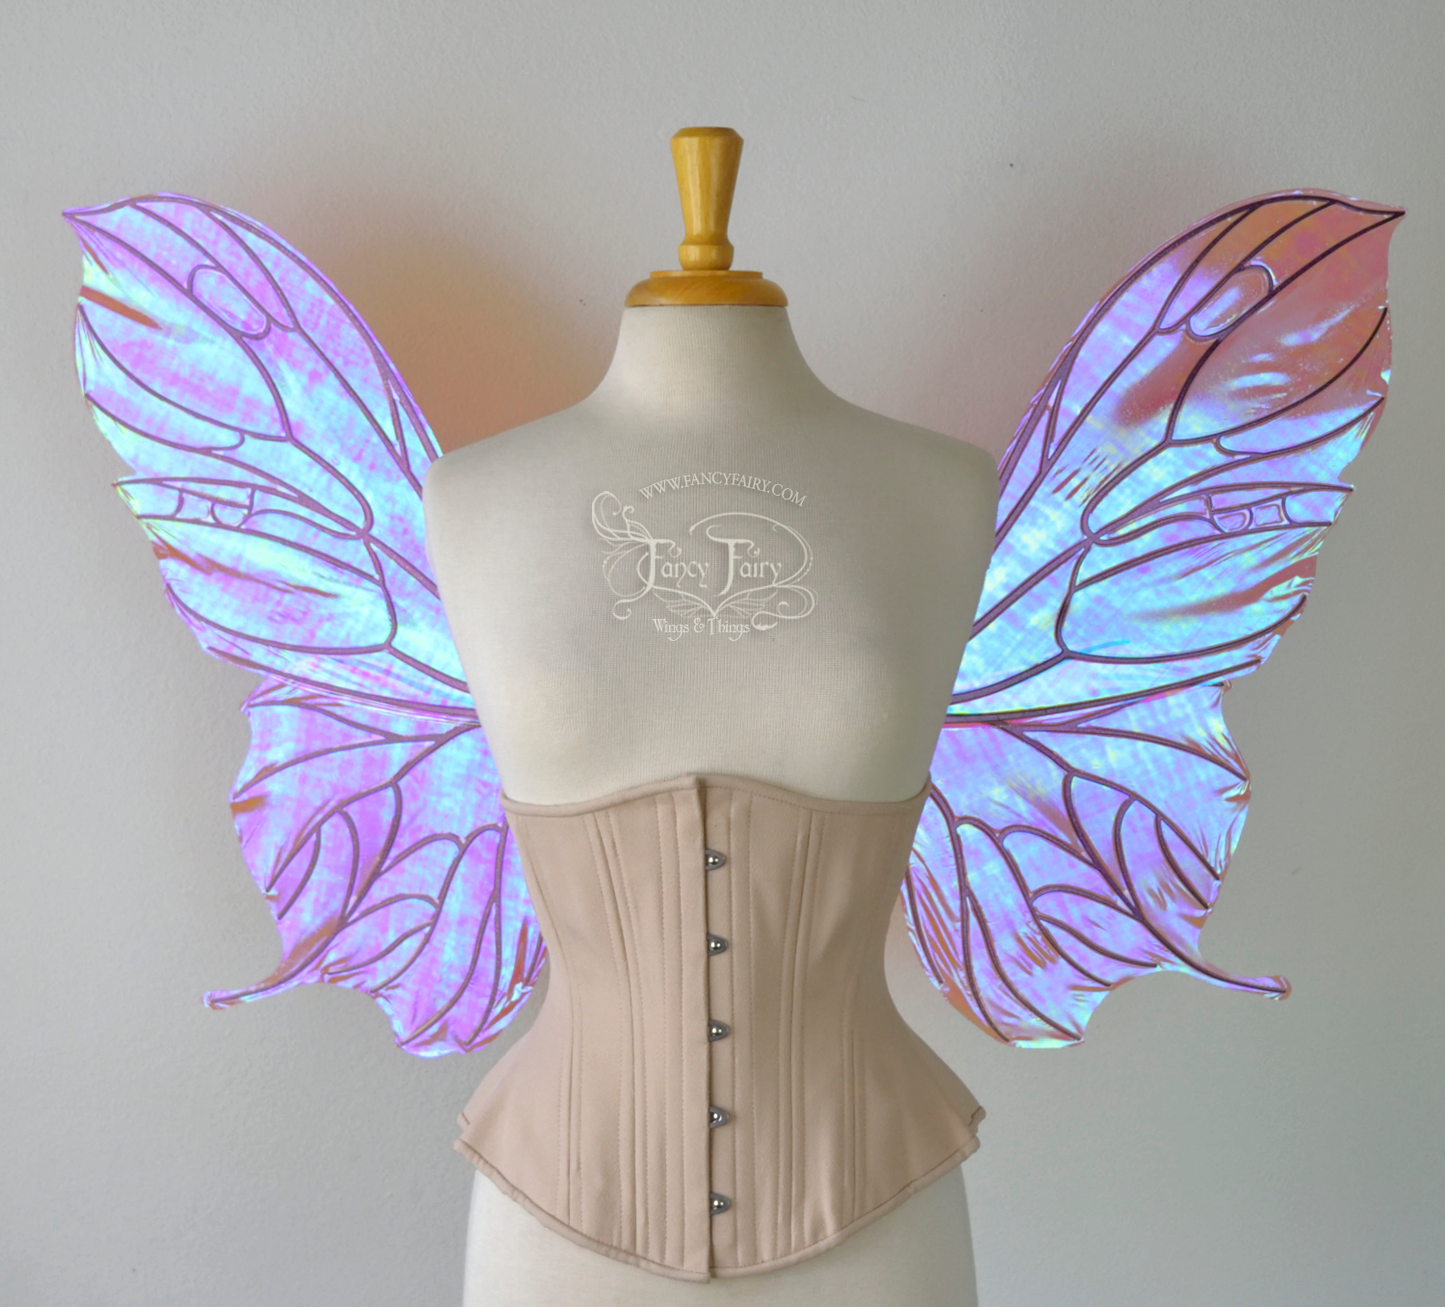 Pansy Iridescent Convertible Fairy Wings in Berry with Chameleon Cherry Violet Glitter veins